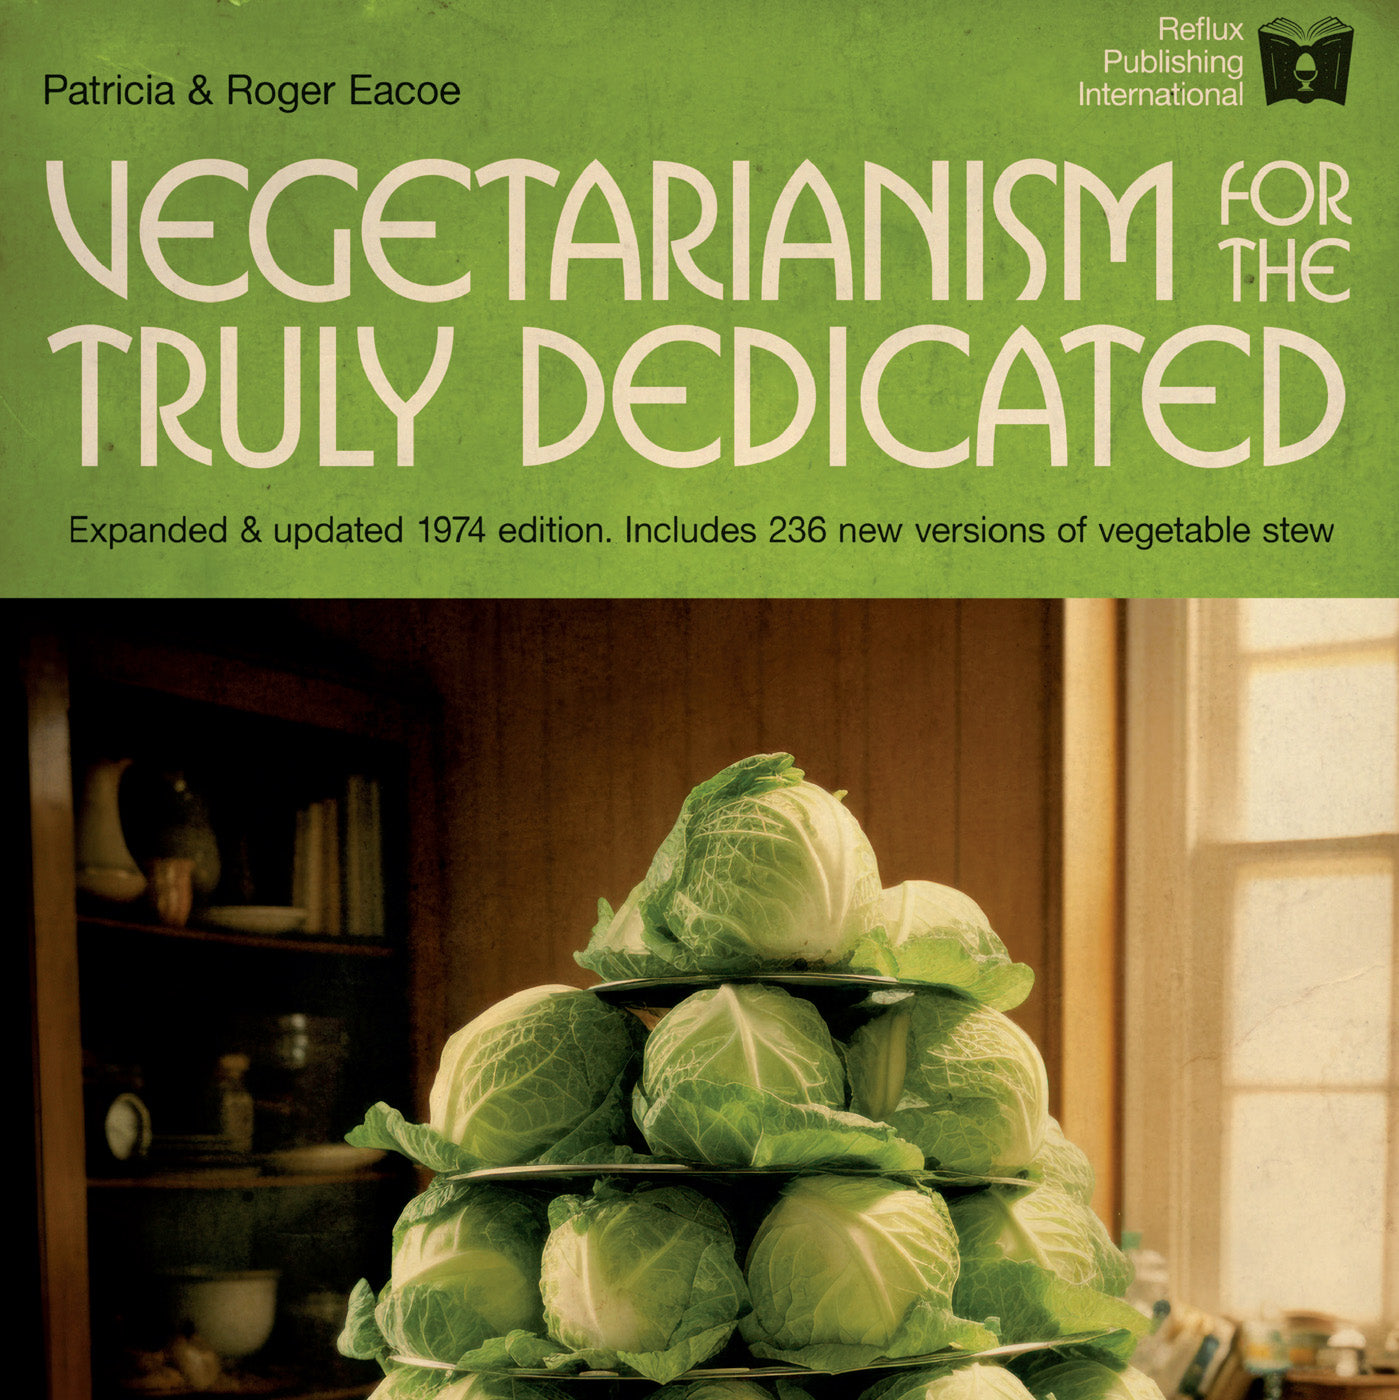 Humorous art print showing a vintage-style cookbook cover titled 'Vegetarianism for the Truly Dedicated,' featuring a towering pile of raw cabbages as a meal